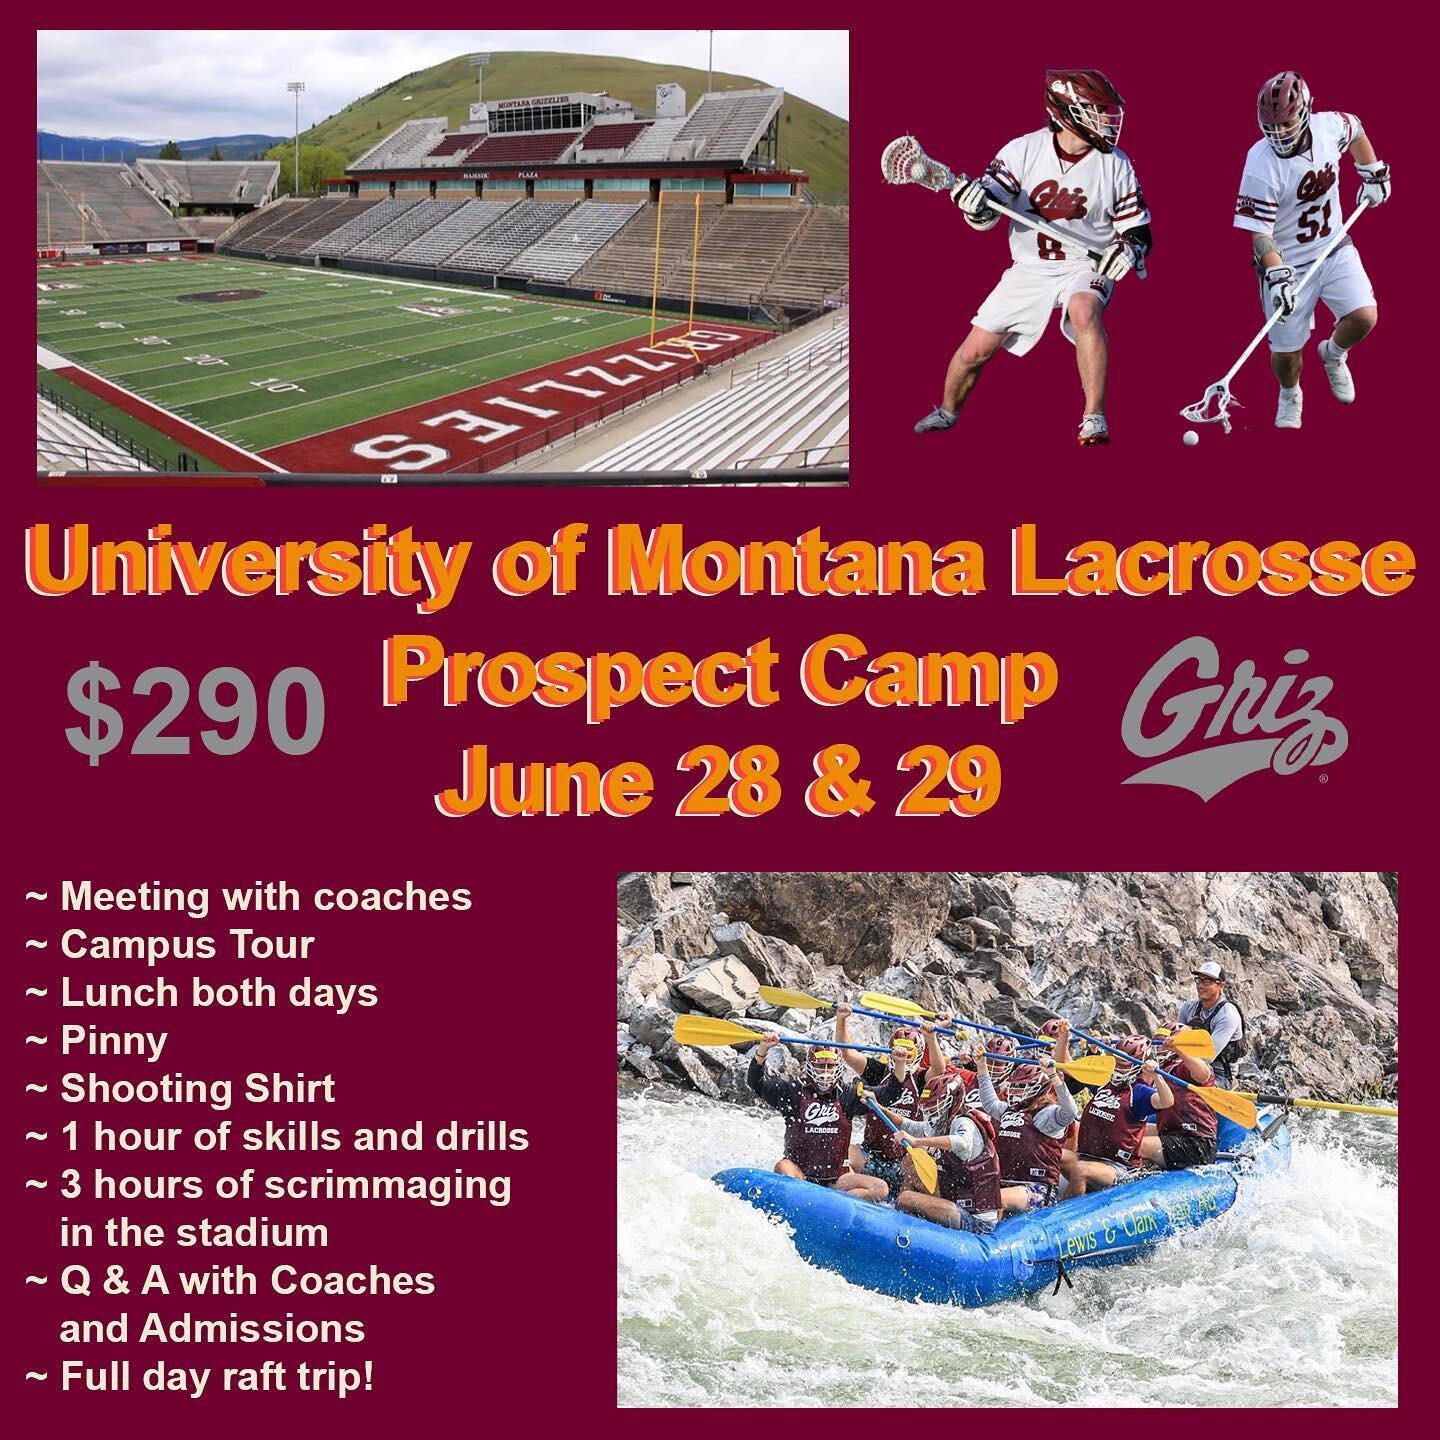 Interested in playing lacrosse in college at Montana? Register for our prospect camp June 28th and 29th. Open to anyone graduating in 2023, 2024, 2025 and 2026. Visit campus, meet with coaches and admissions staff, tour facilities, play in our stadiu